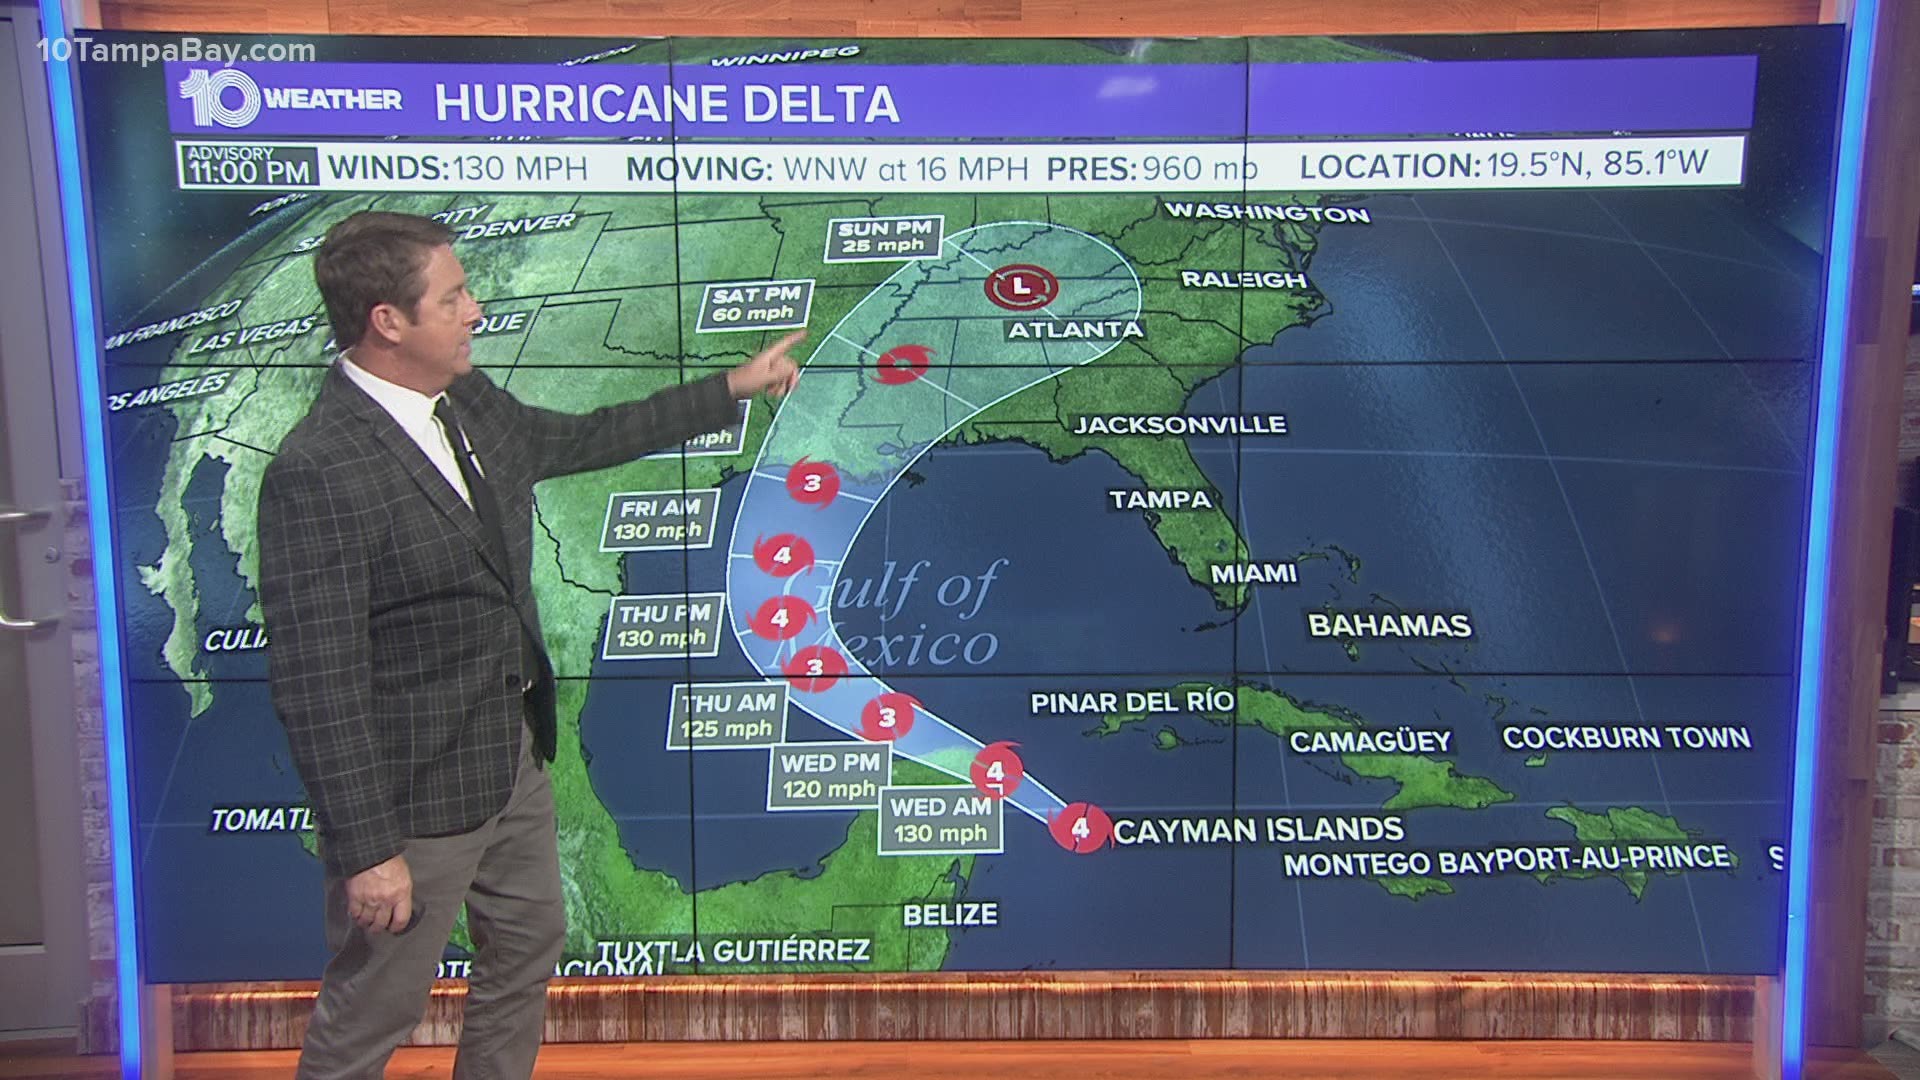 The NHC says Delta is expected to be an "extremely dangerous" hurricane when it reaches the Yucatan peninsula.